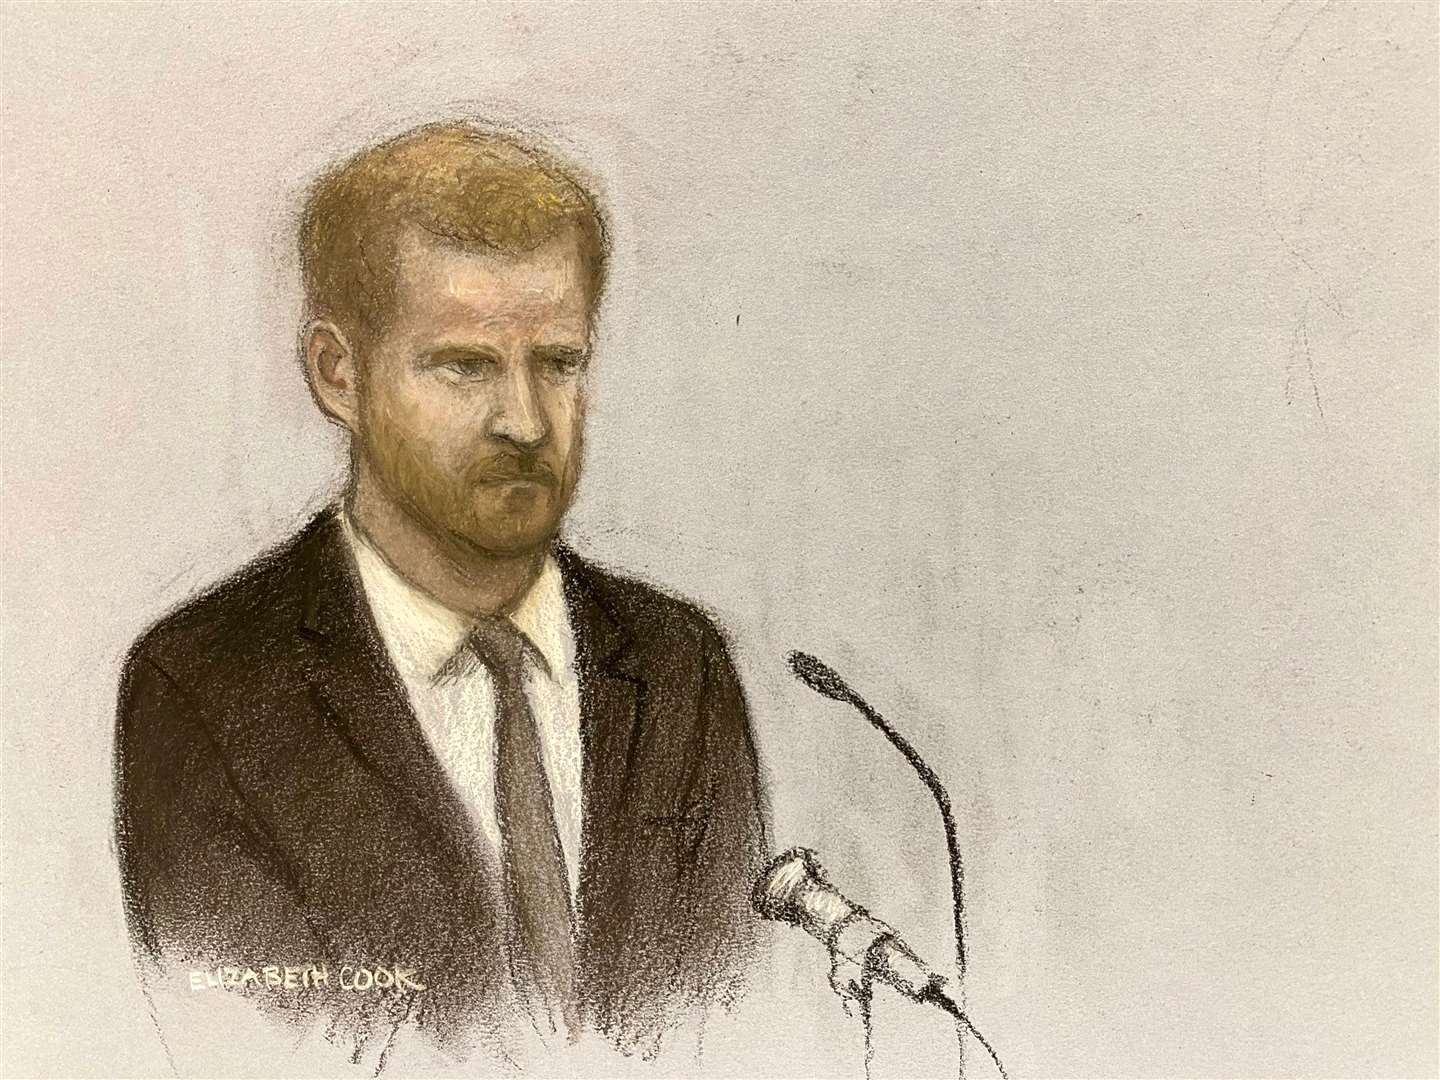 The Duke of Sussex giving evidence at the Rolls Buildings in central London during the phone hacking trial against Mirror Group Newspapers (MGN) (Elizabeth Cook/PA)